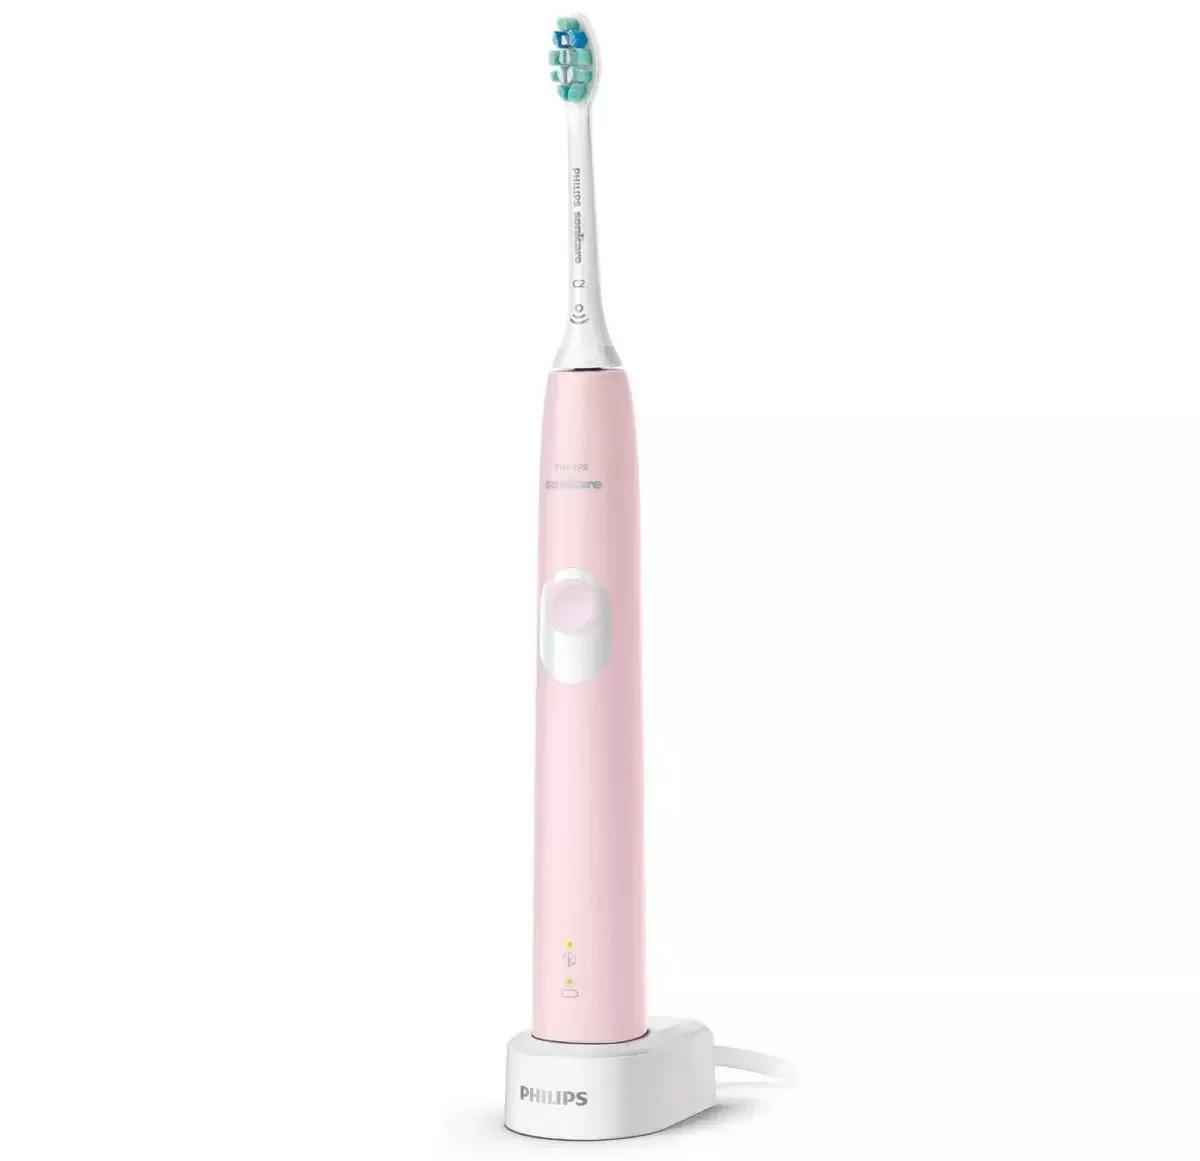 Philips Sonicare Advance 4100 Toothbrush for $34.99